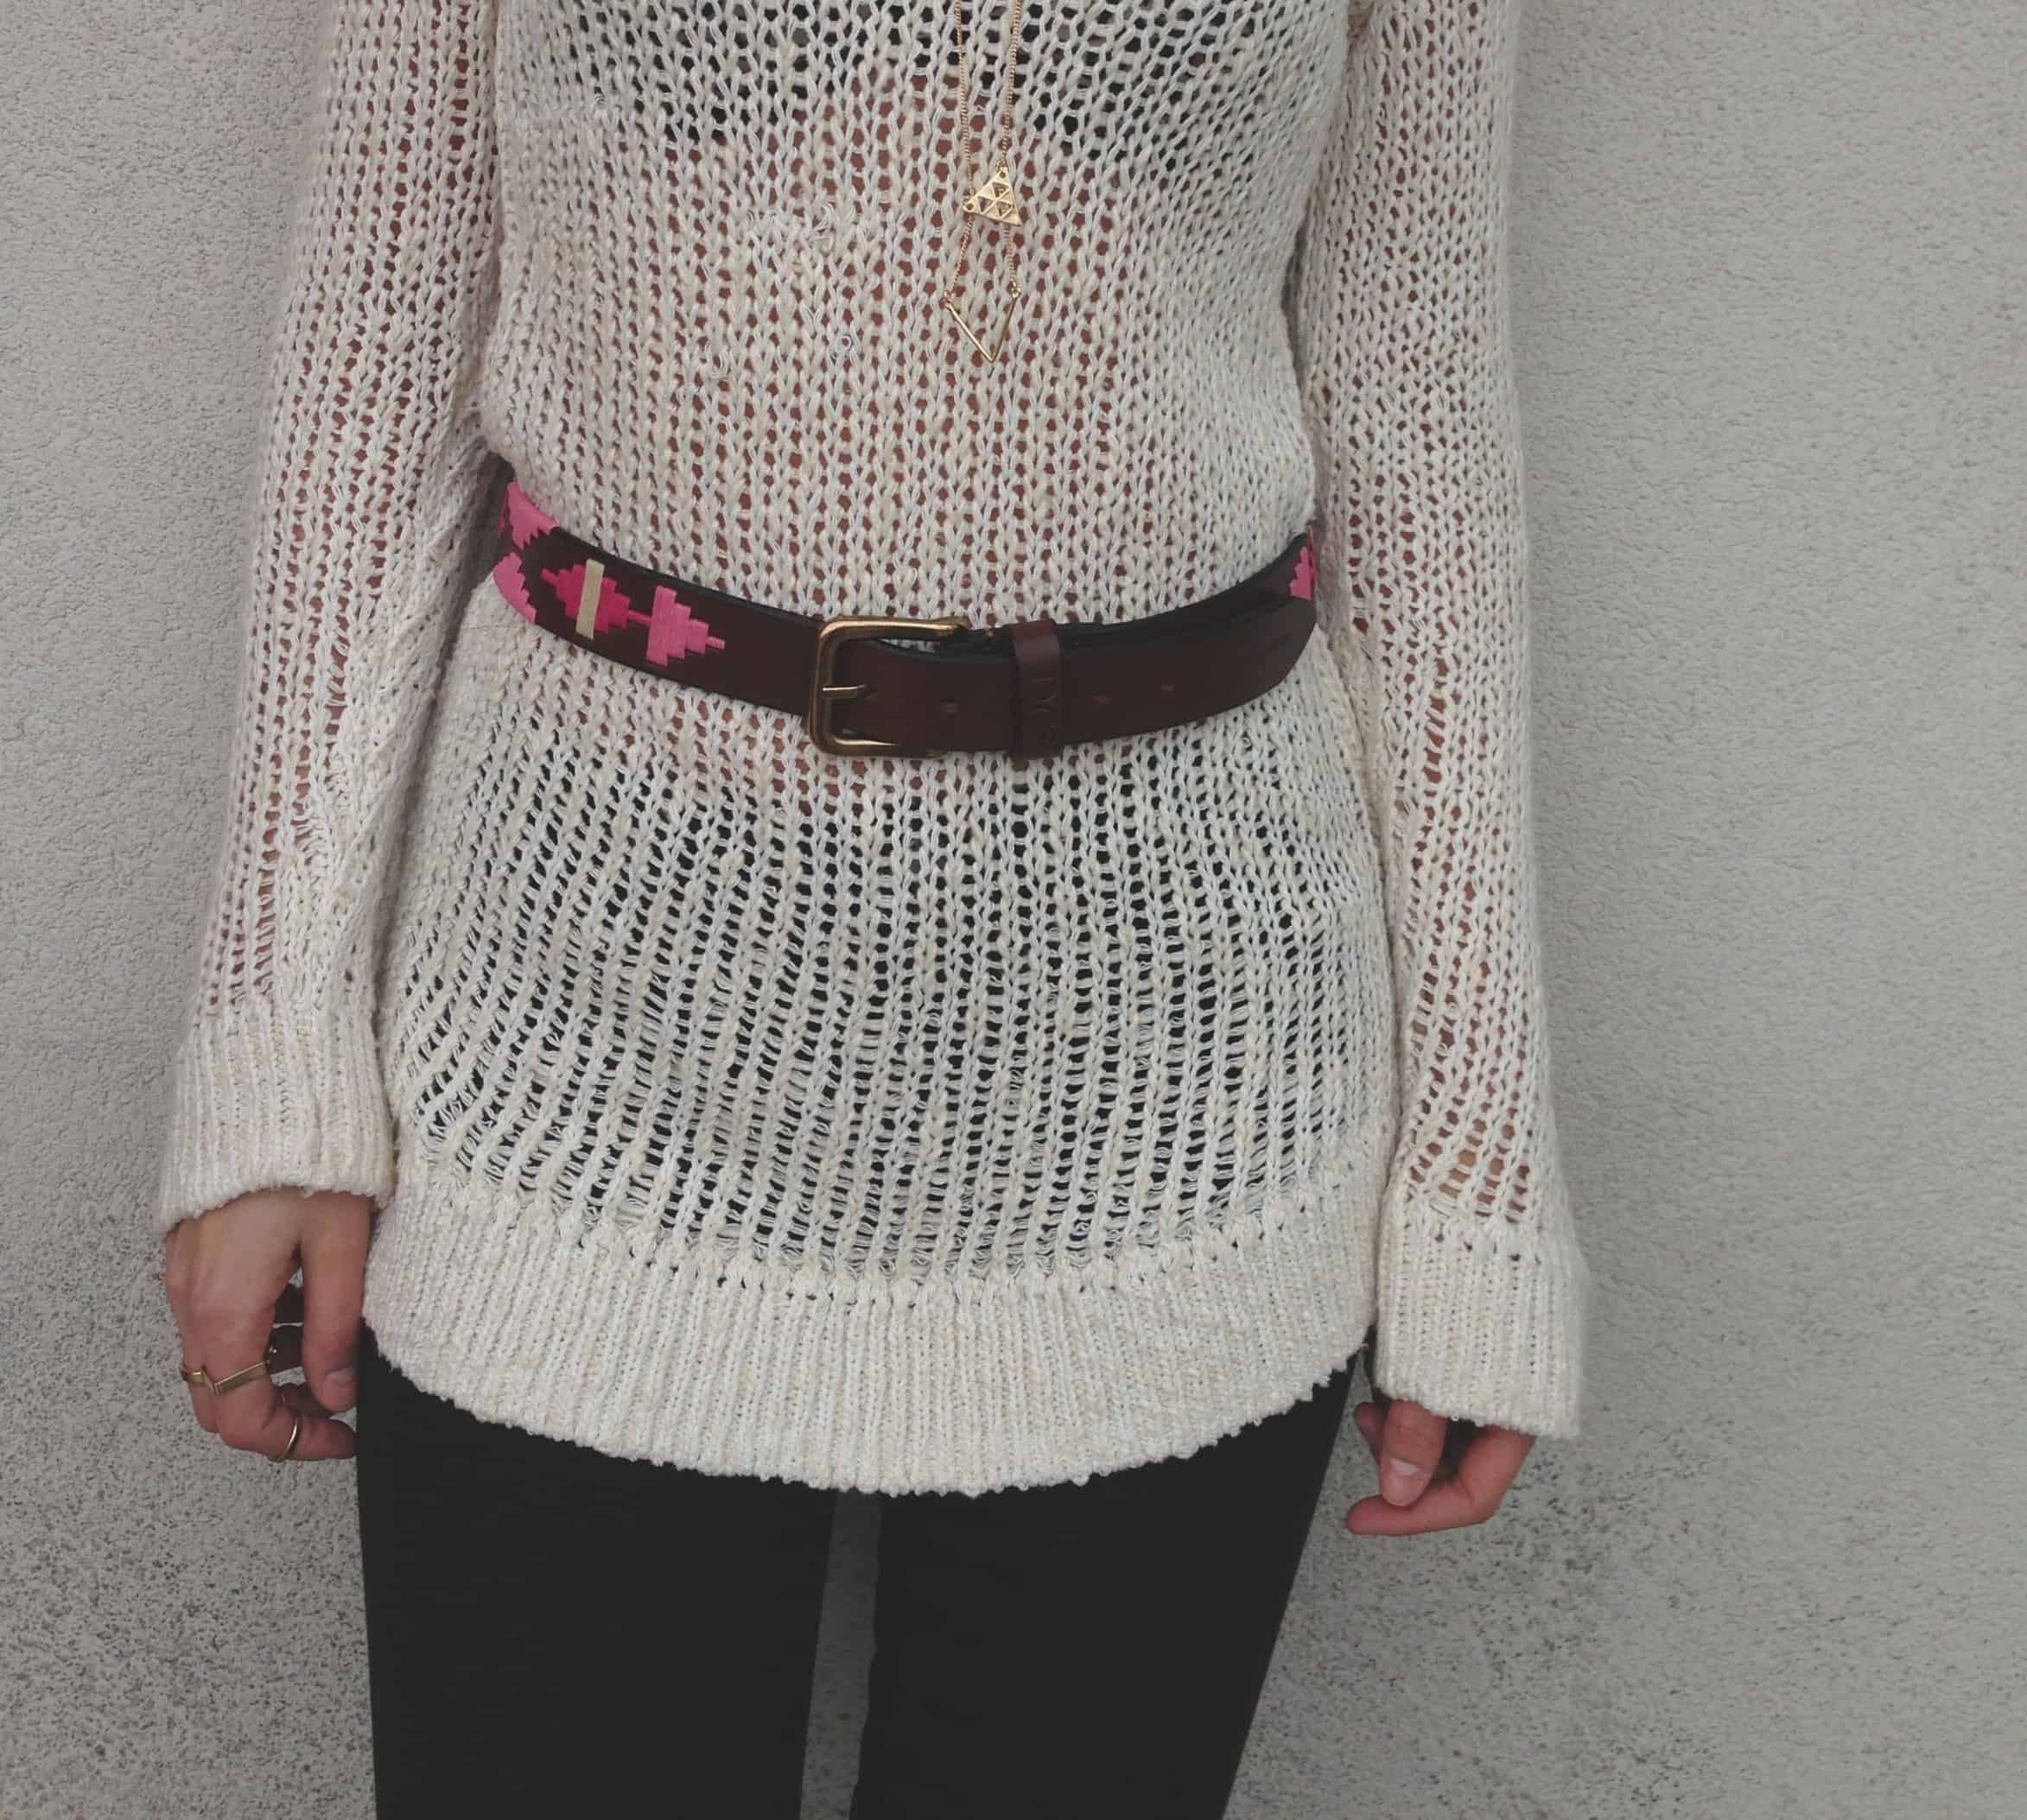 belt-over-sweater-style-fashiontag-